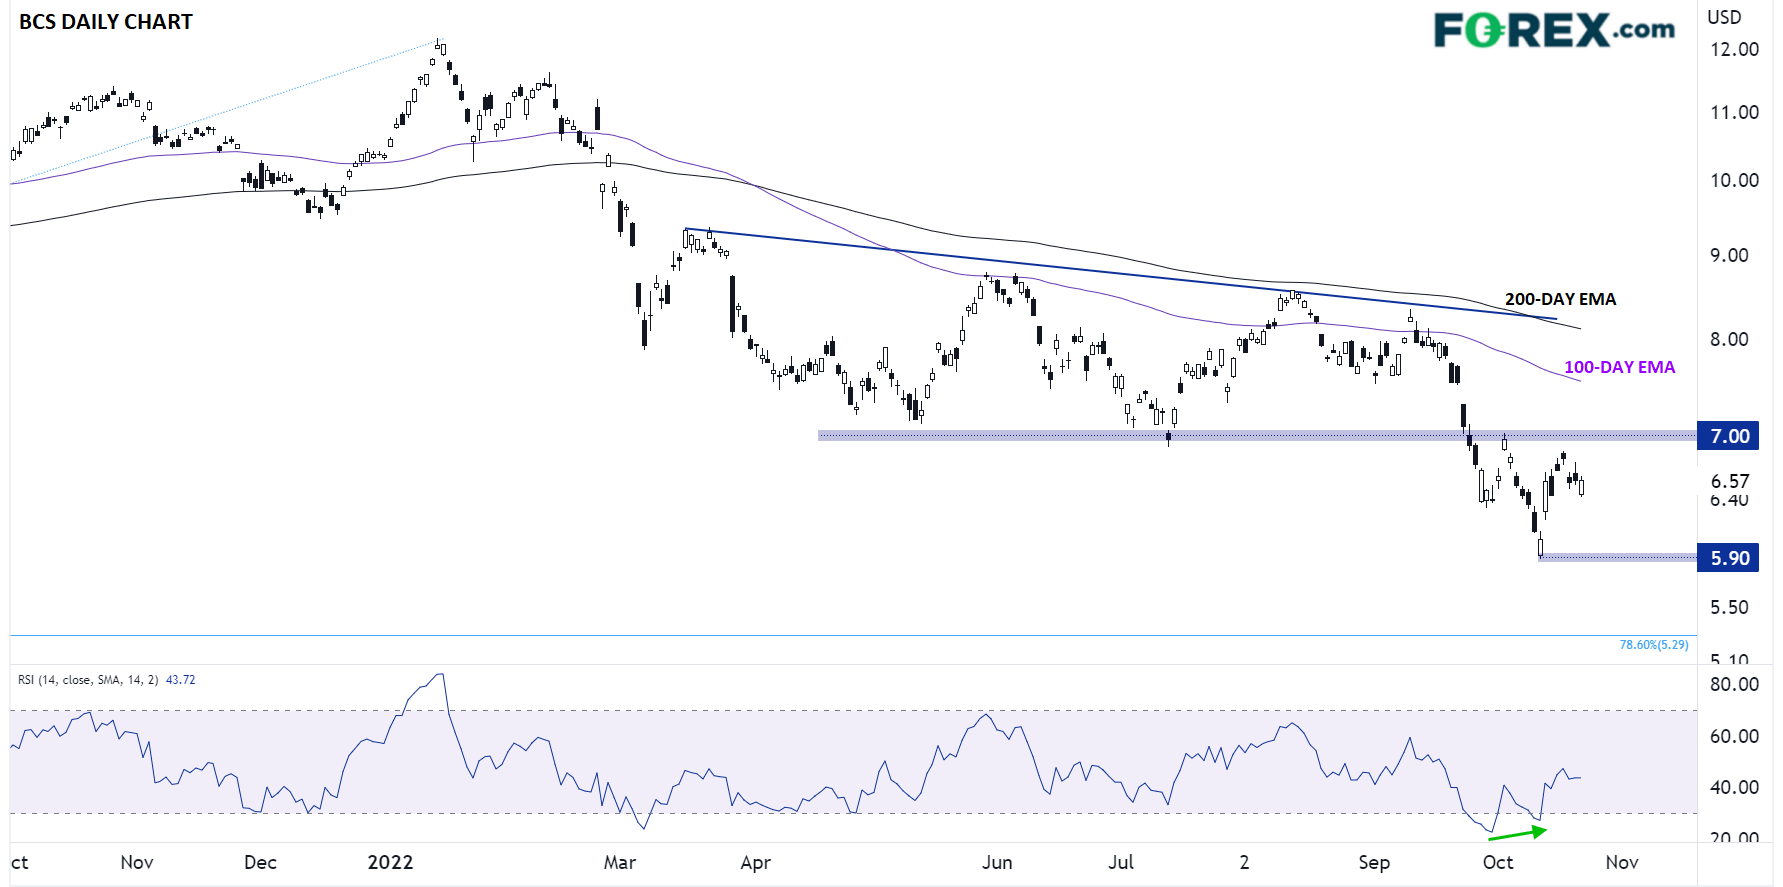 Barclays Daily Chart